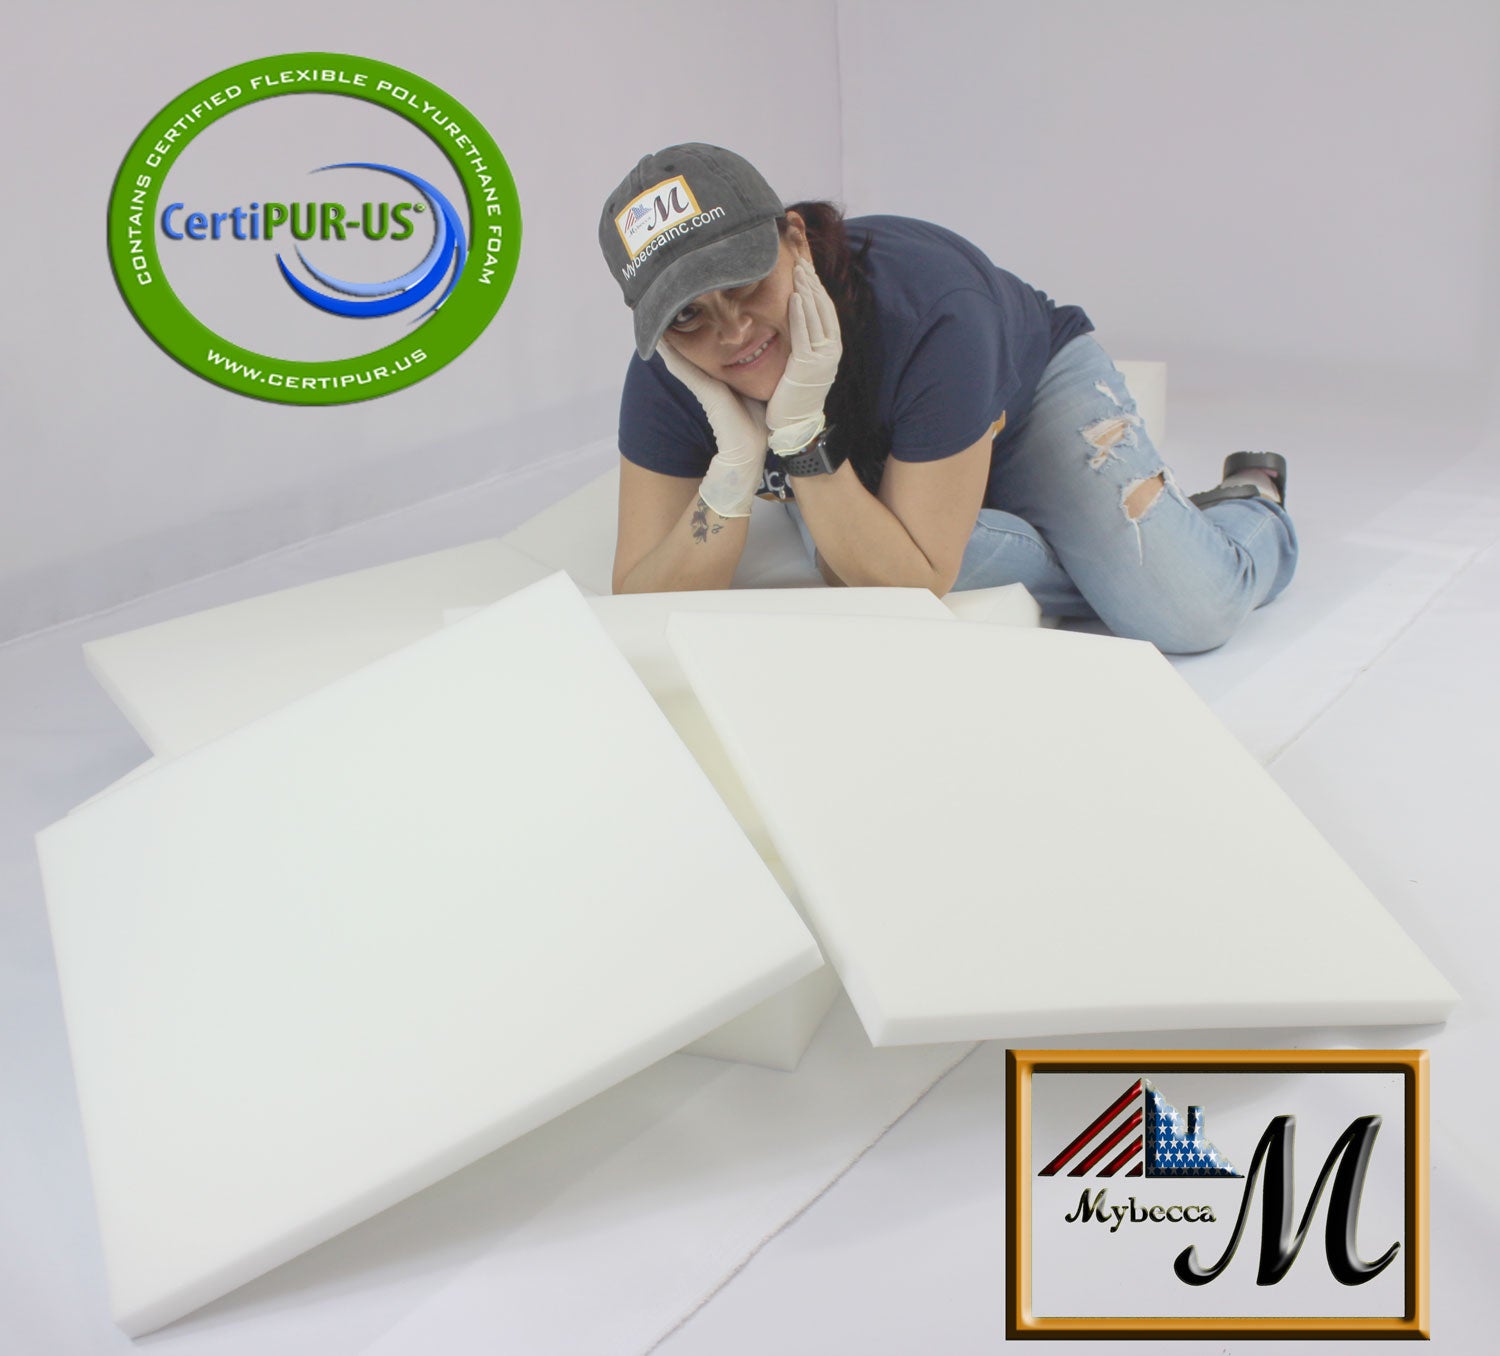 Upholstery Foam Cushion High Density (Seat Replacement, Upholstery